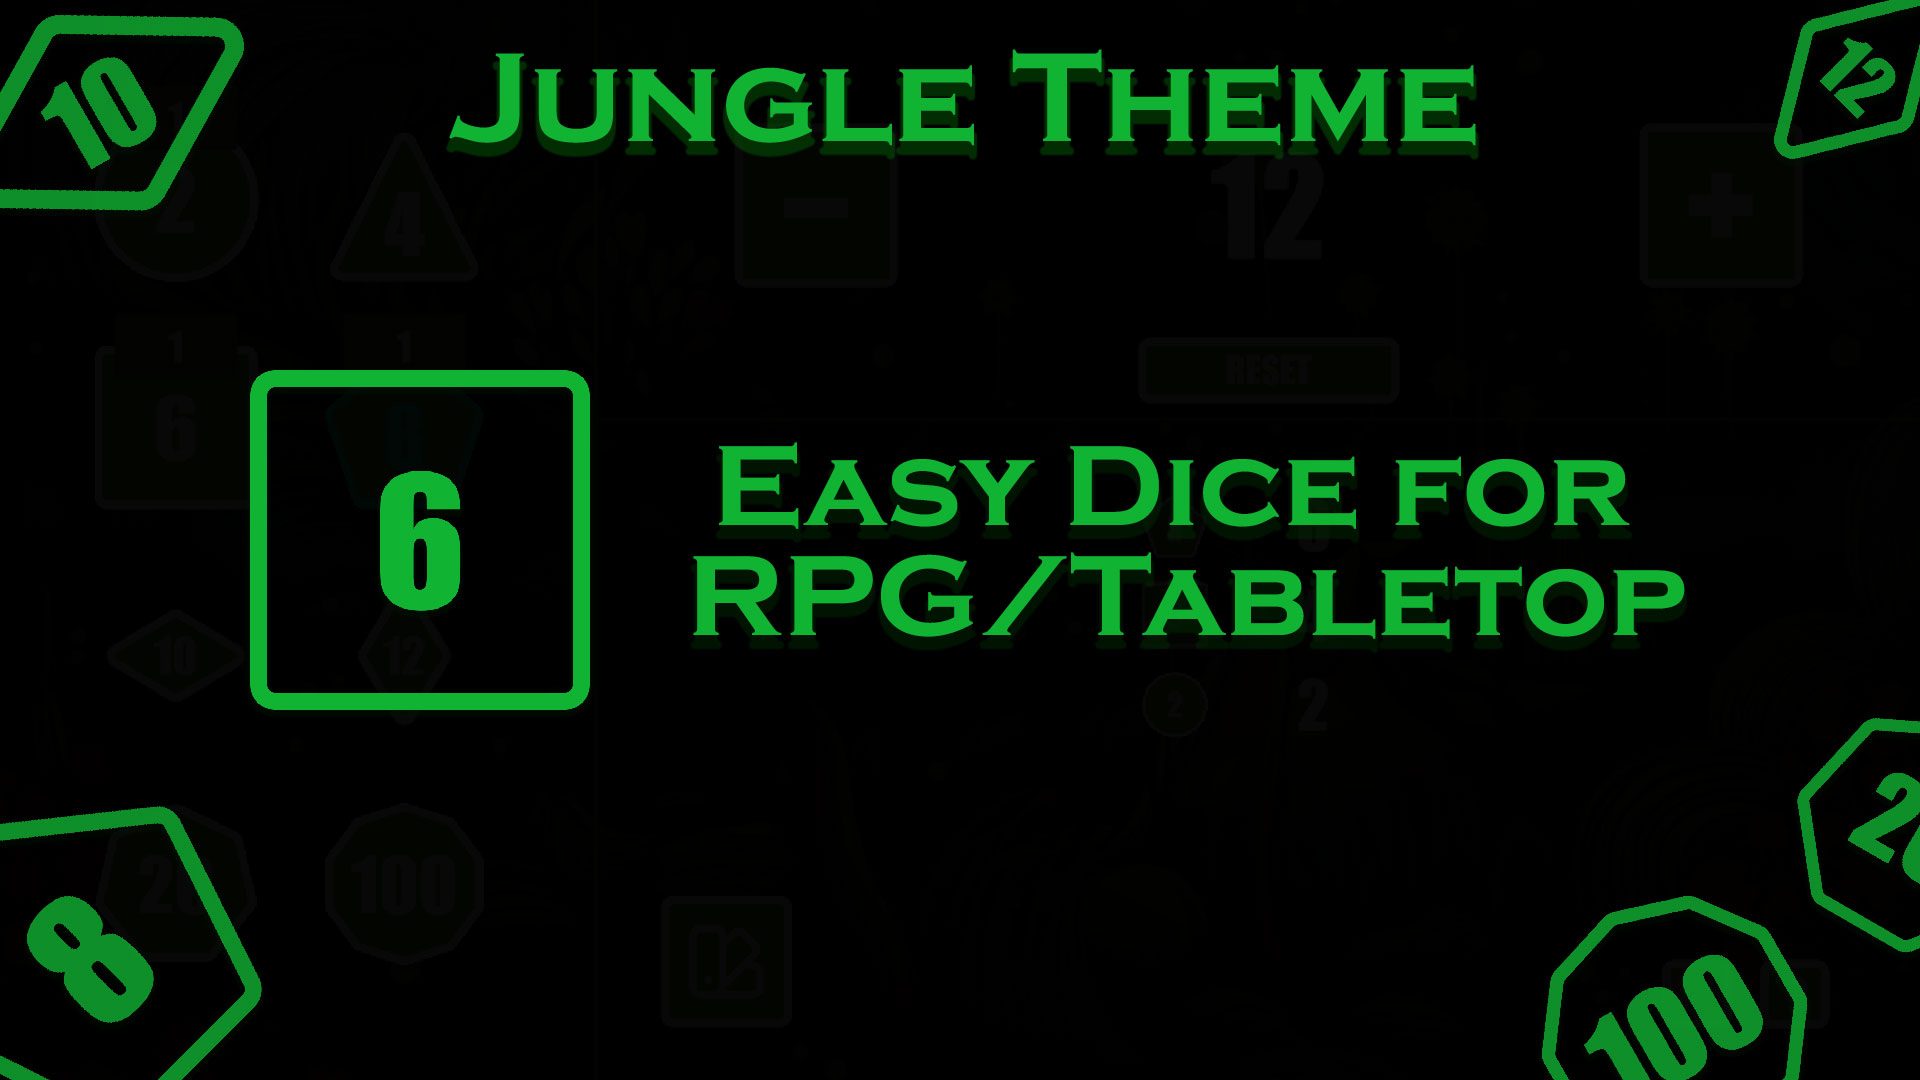 Easy Dice for RPG/Tabletop - Jungle Theme